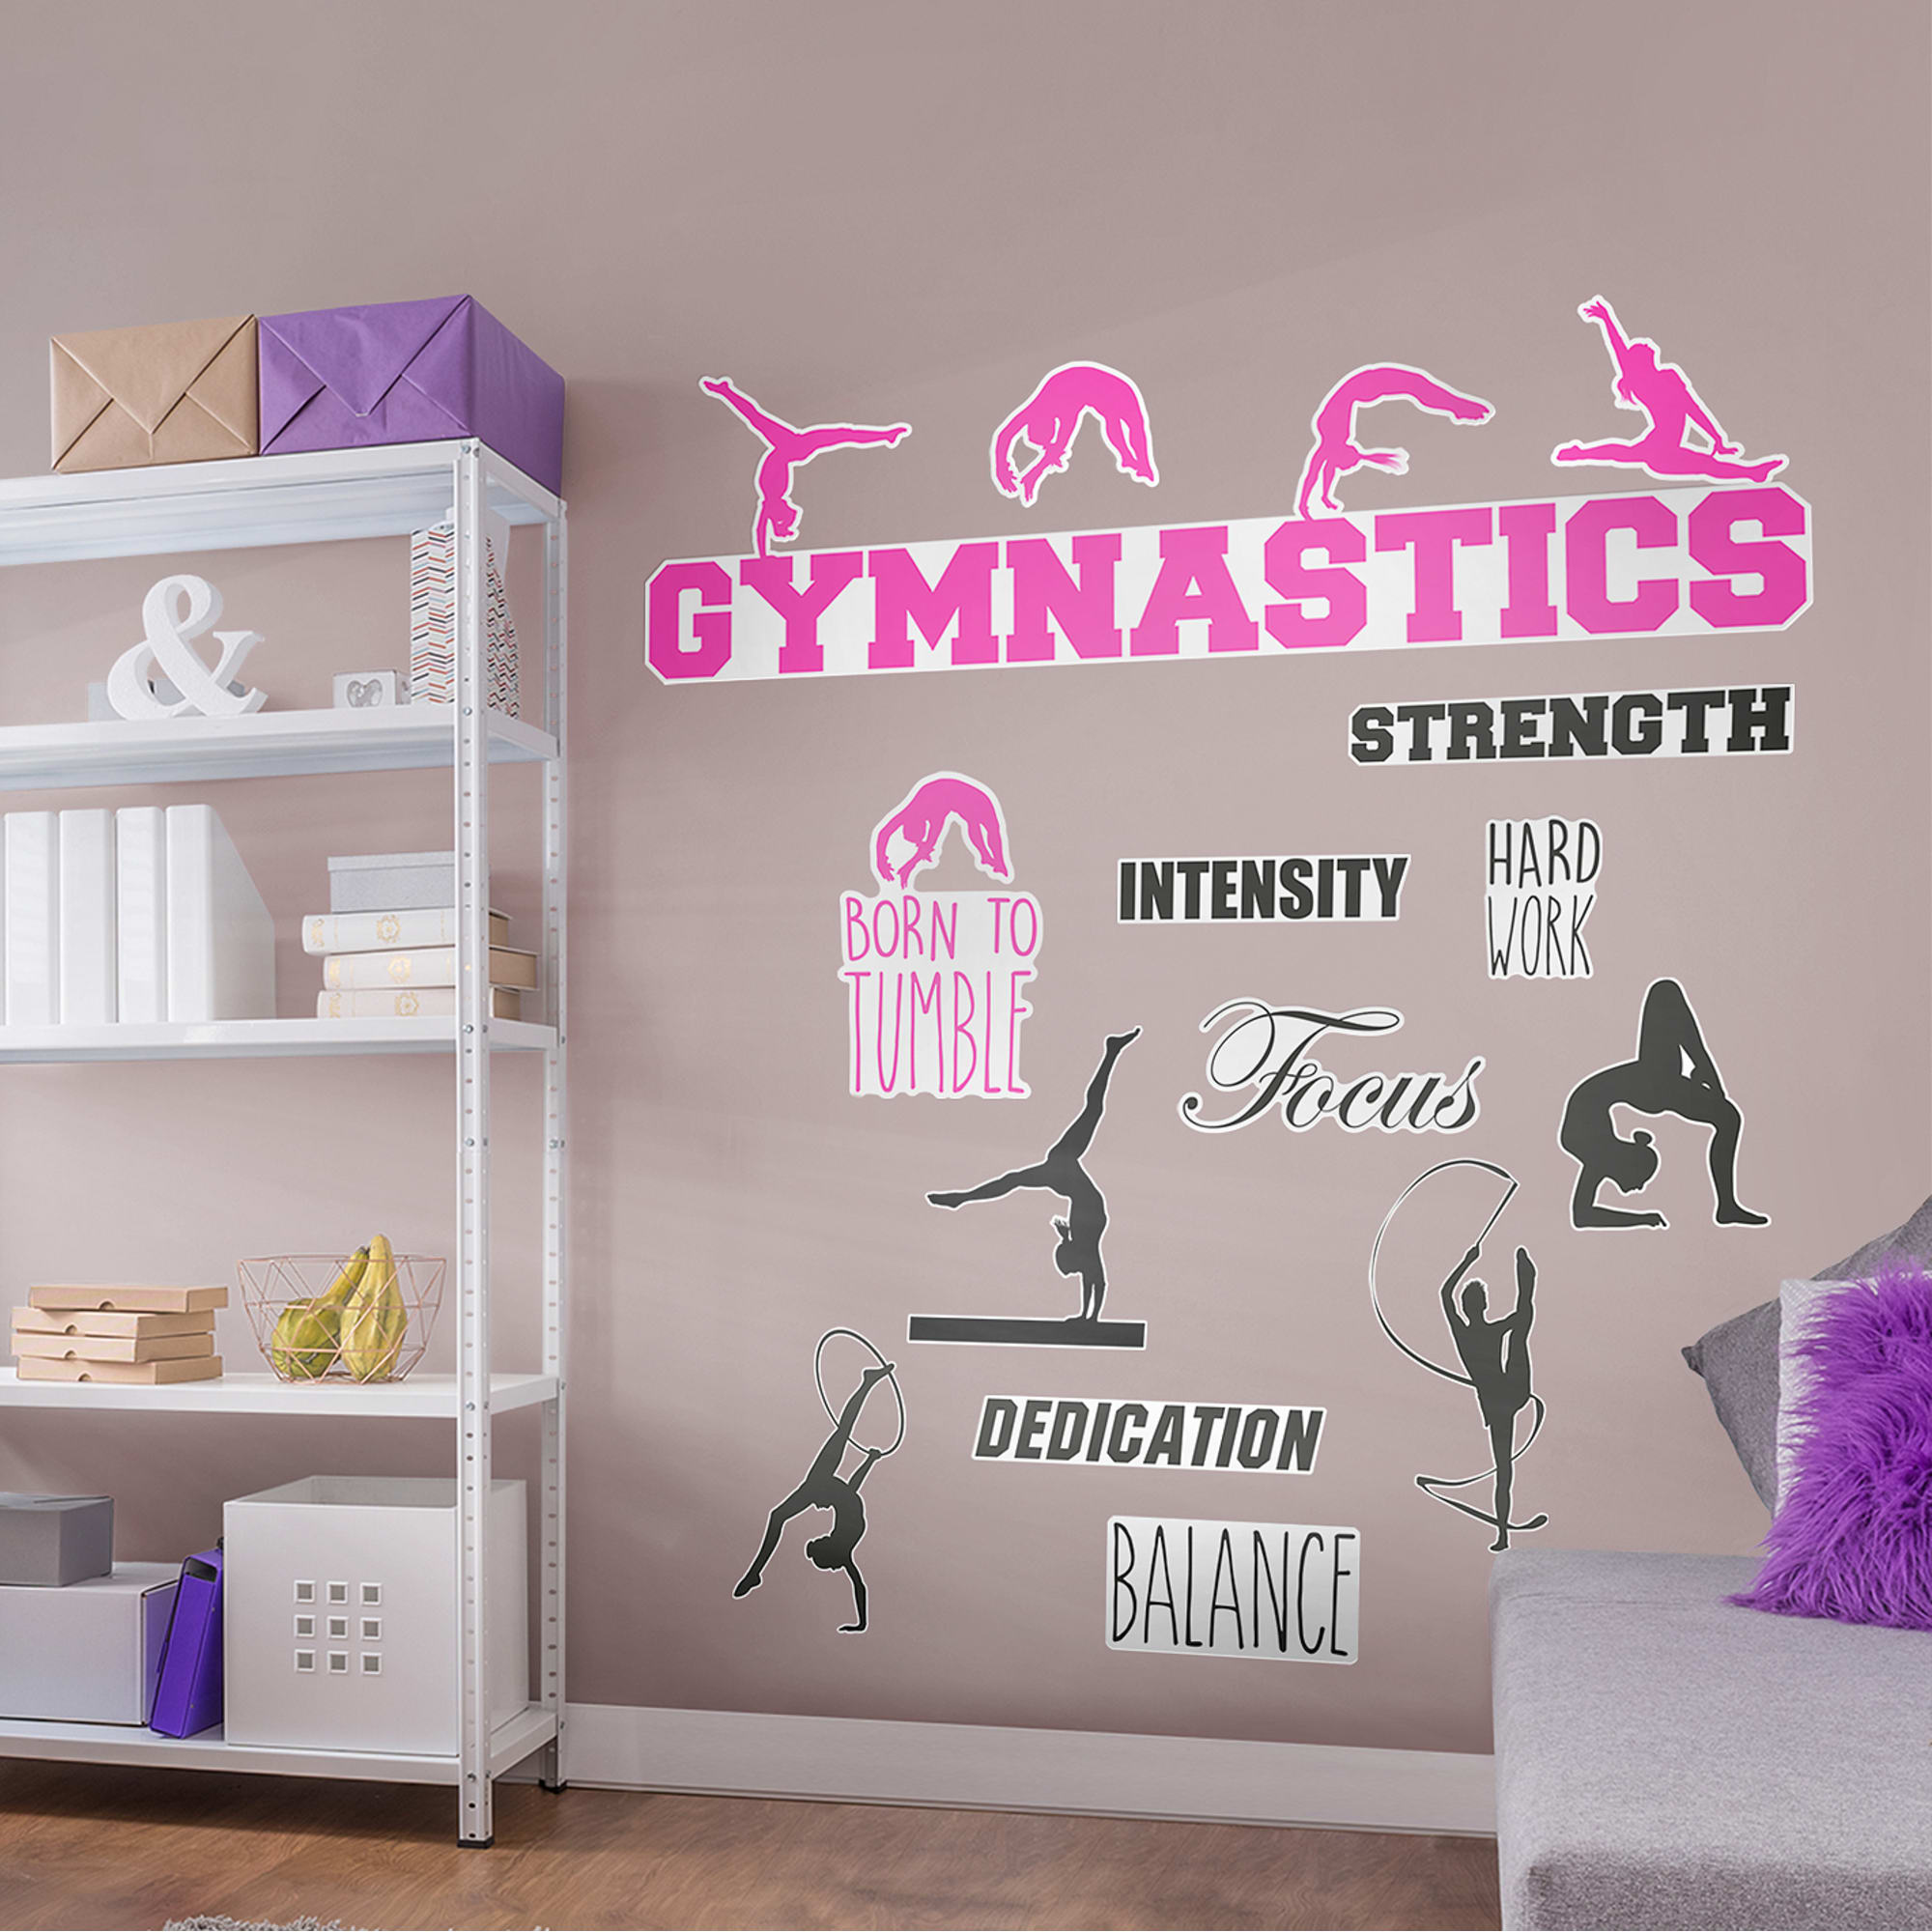 Gymnastics: Collection - Removable Vinyl Decal 79.0"W x 52.0"H by Fathead